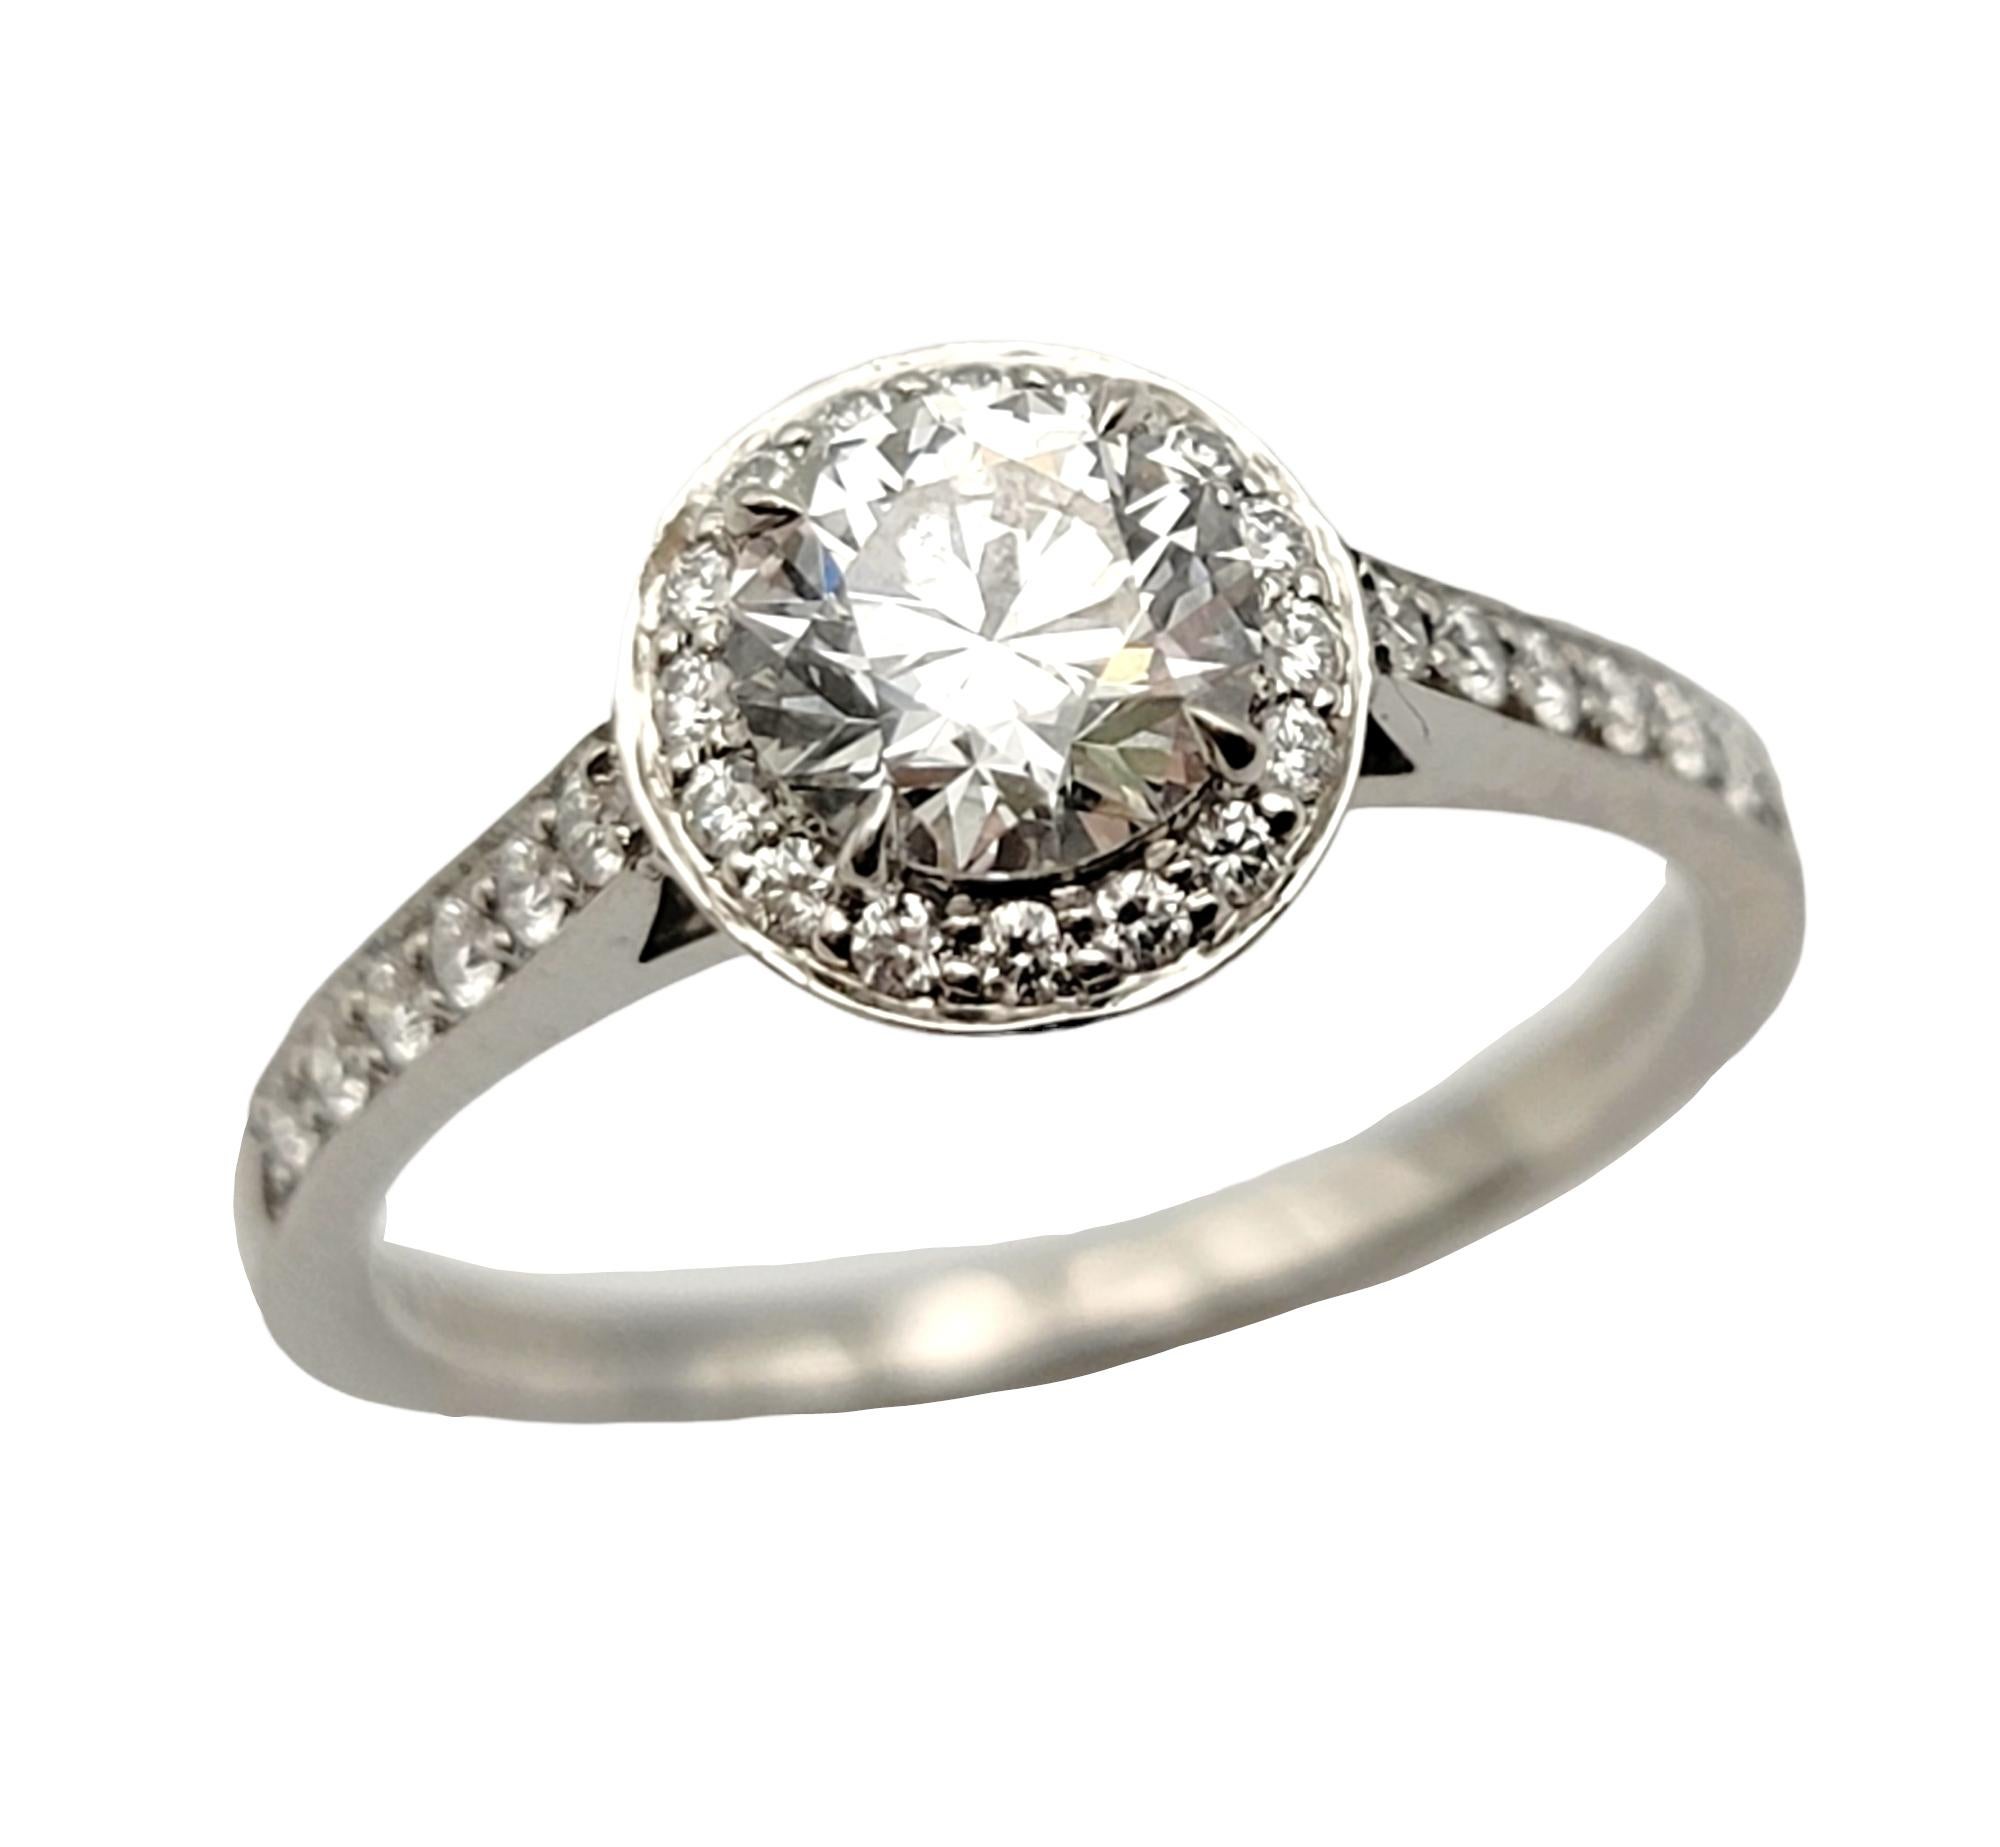 Ring size: 6

Breathtaking diamond halo engagement ring from renowned jeweler, Tiffany & Co.. The luxurious Legacy ring will absolutely radiate on her finger. The striking round cut center stone is paired with a glittering halo of brilliant